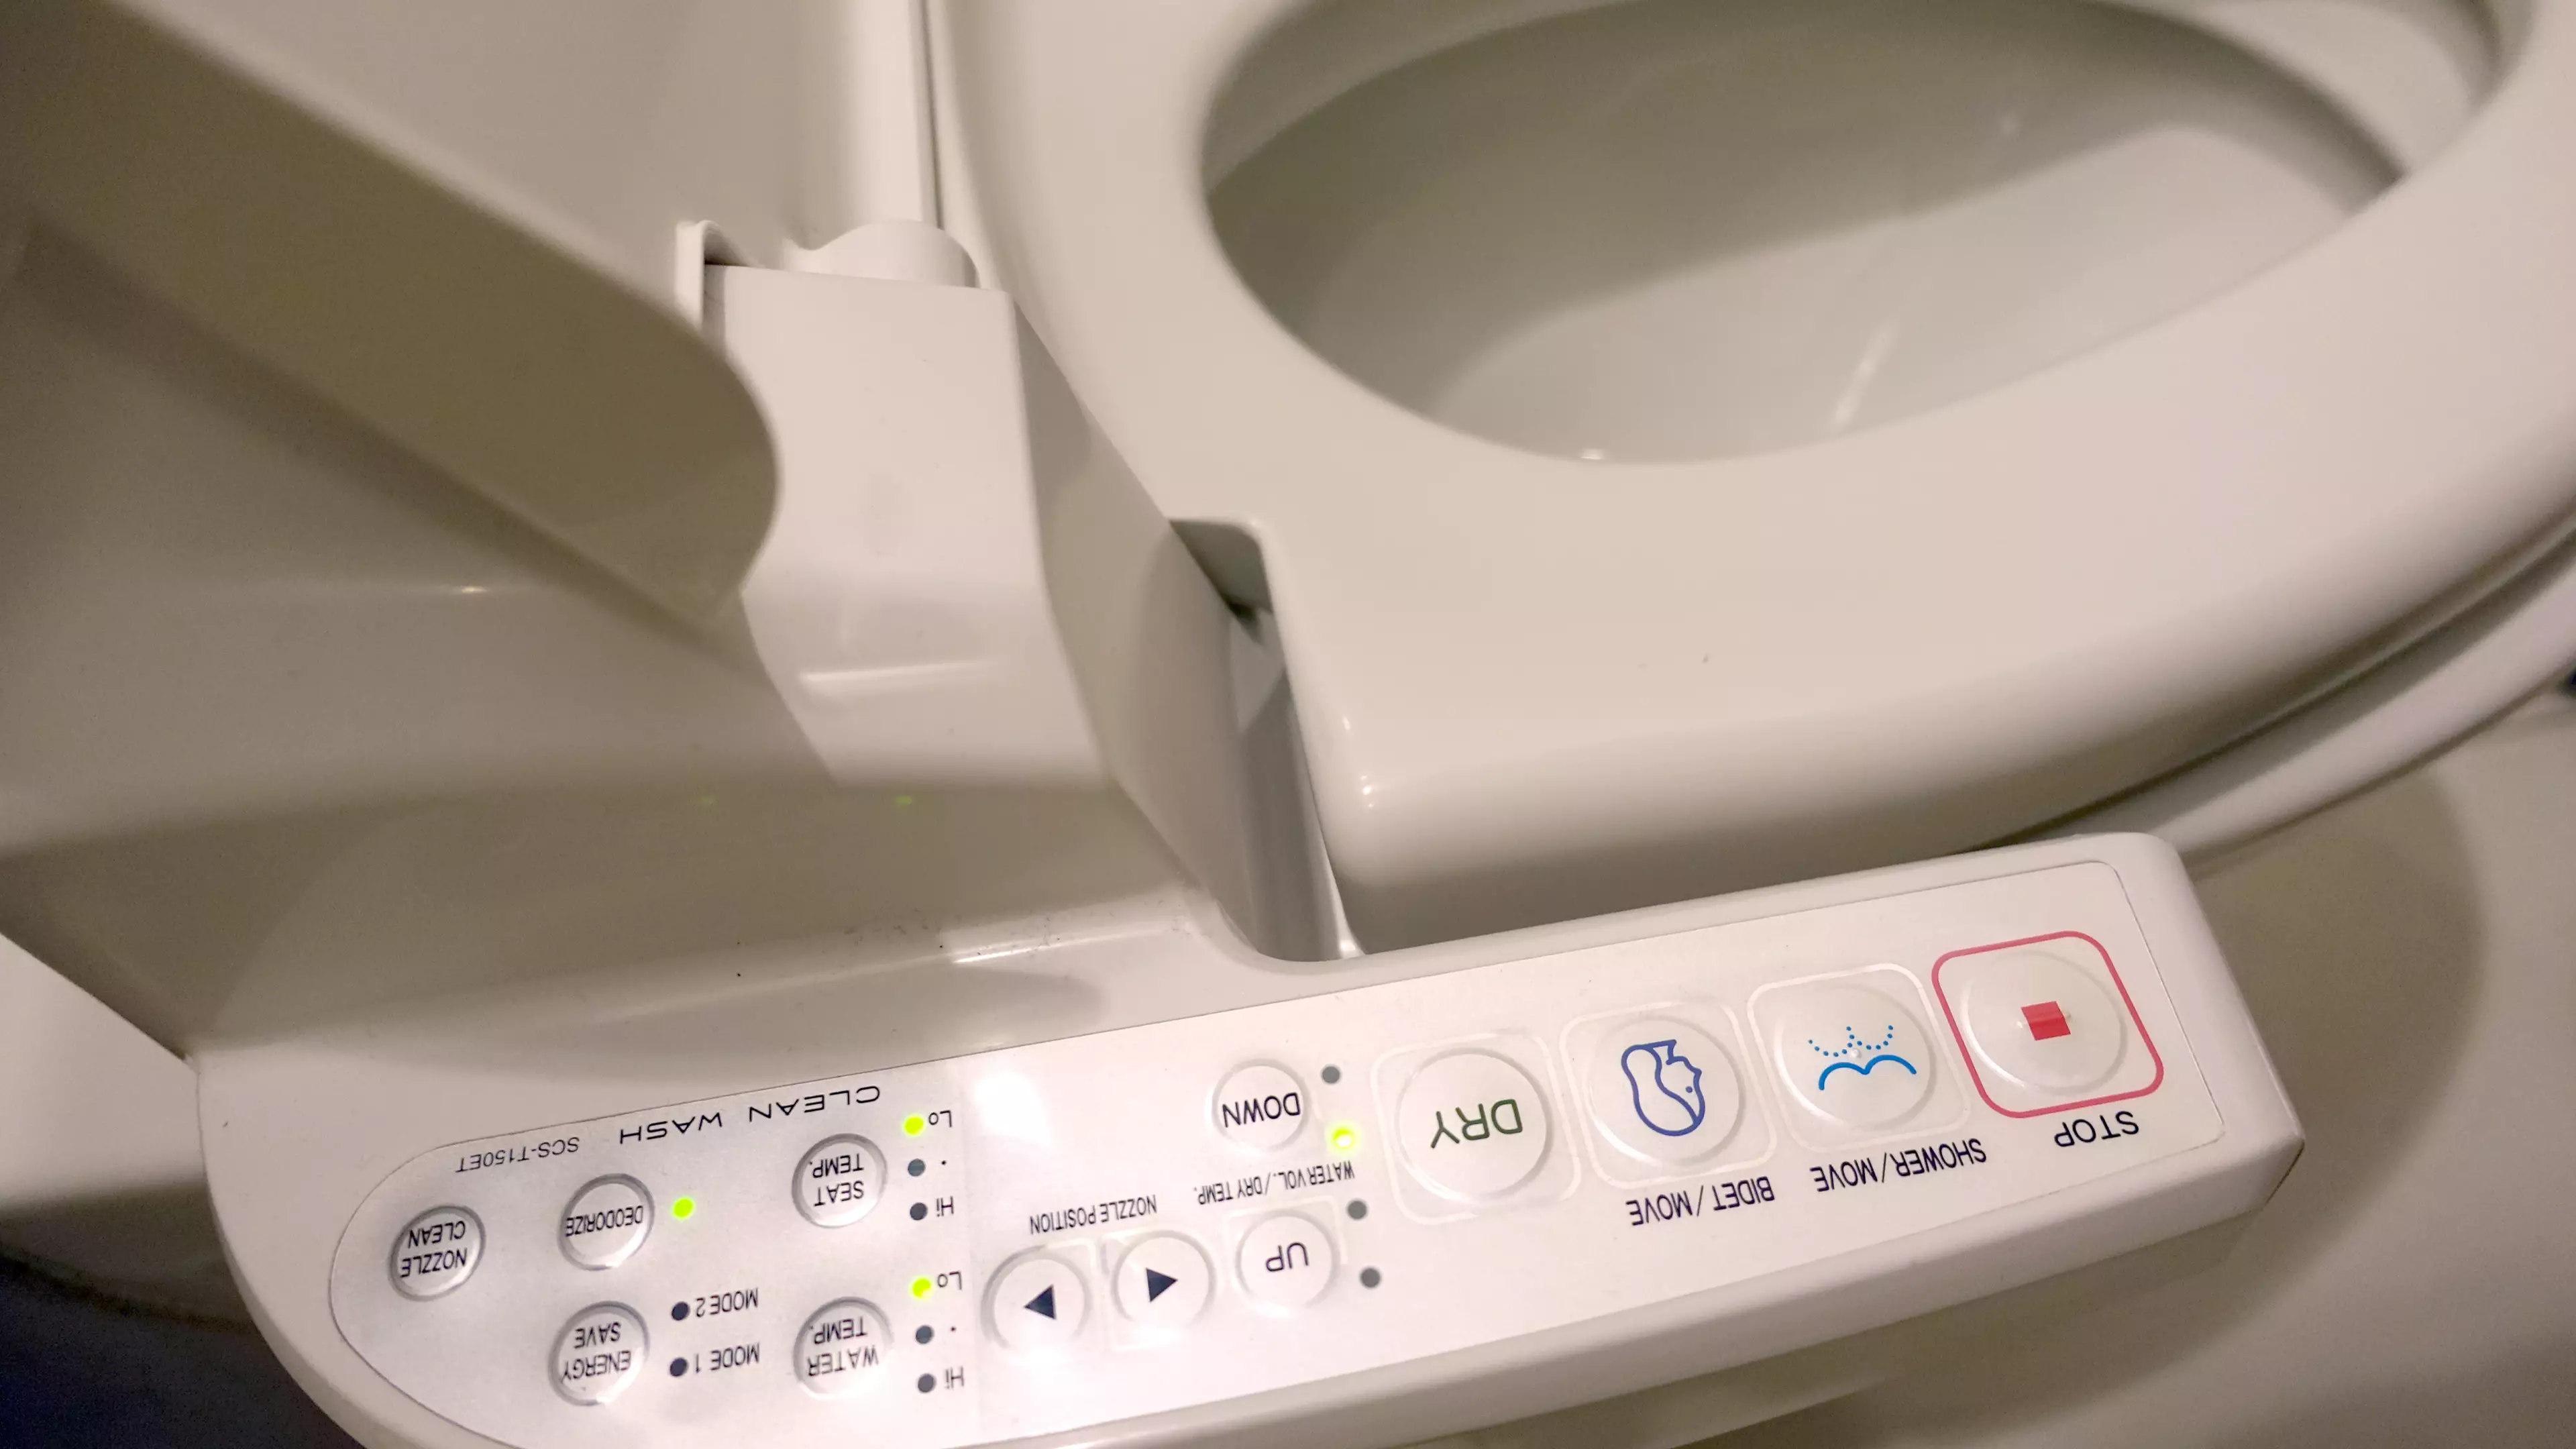 Online Searches For Bidet And 'Bum Guns' Skyrocket In Australia Amid Toilet Paper Panic